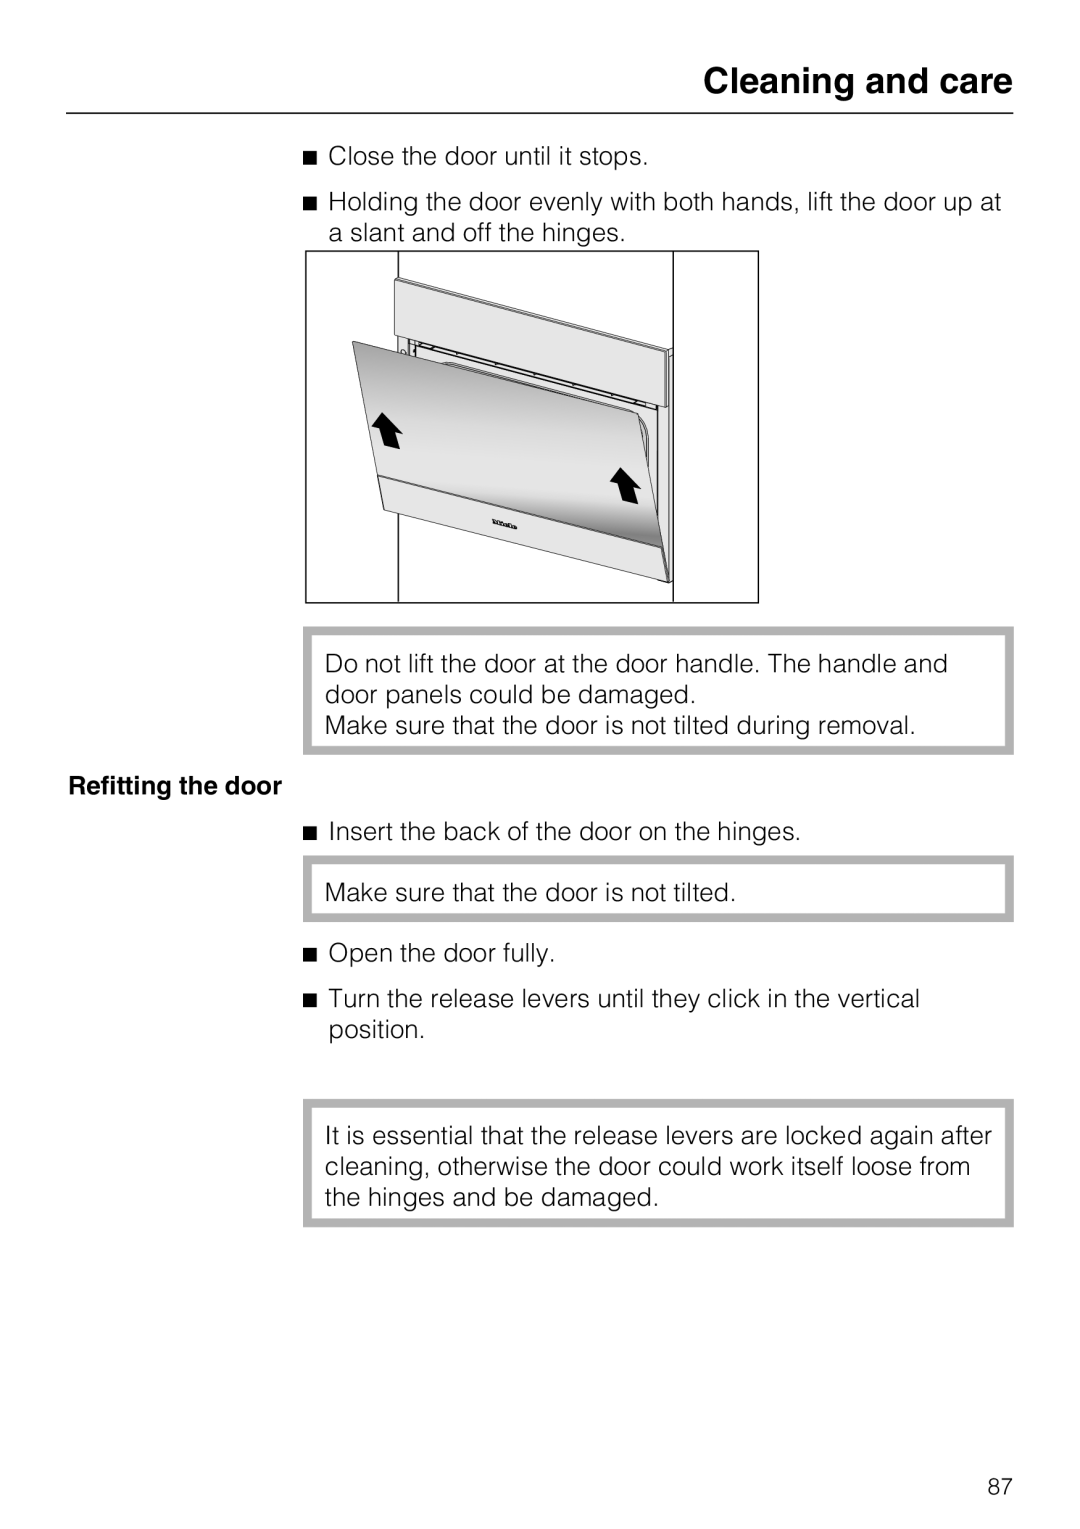 Miele 09 800 830 installation instructions Cleaning and care, Refitting the door 